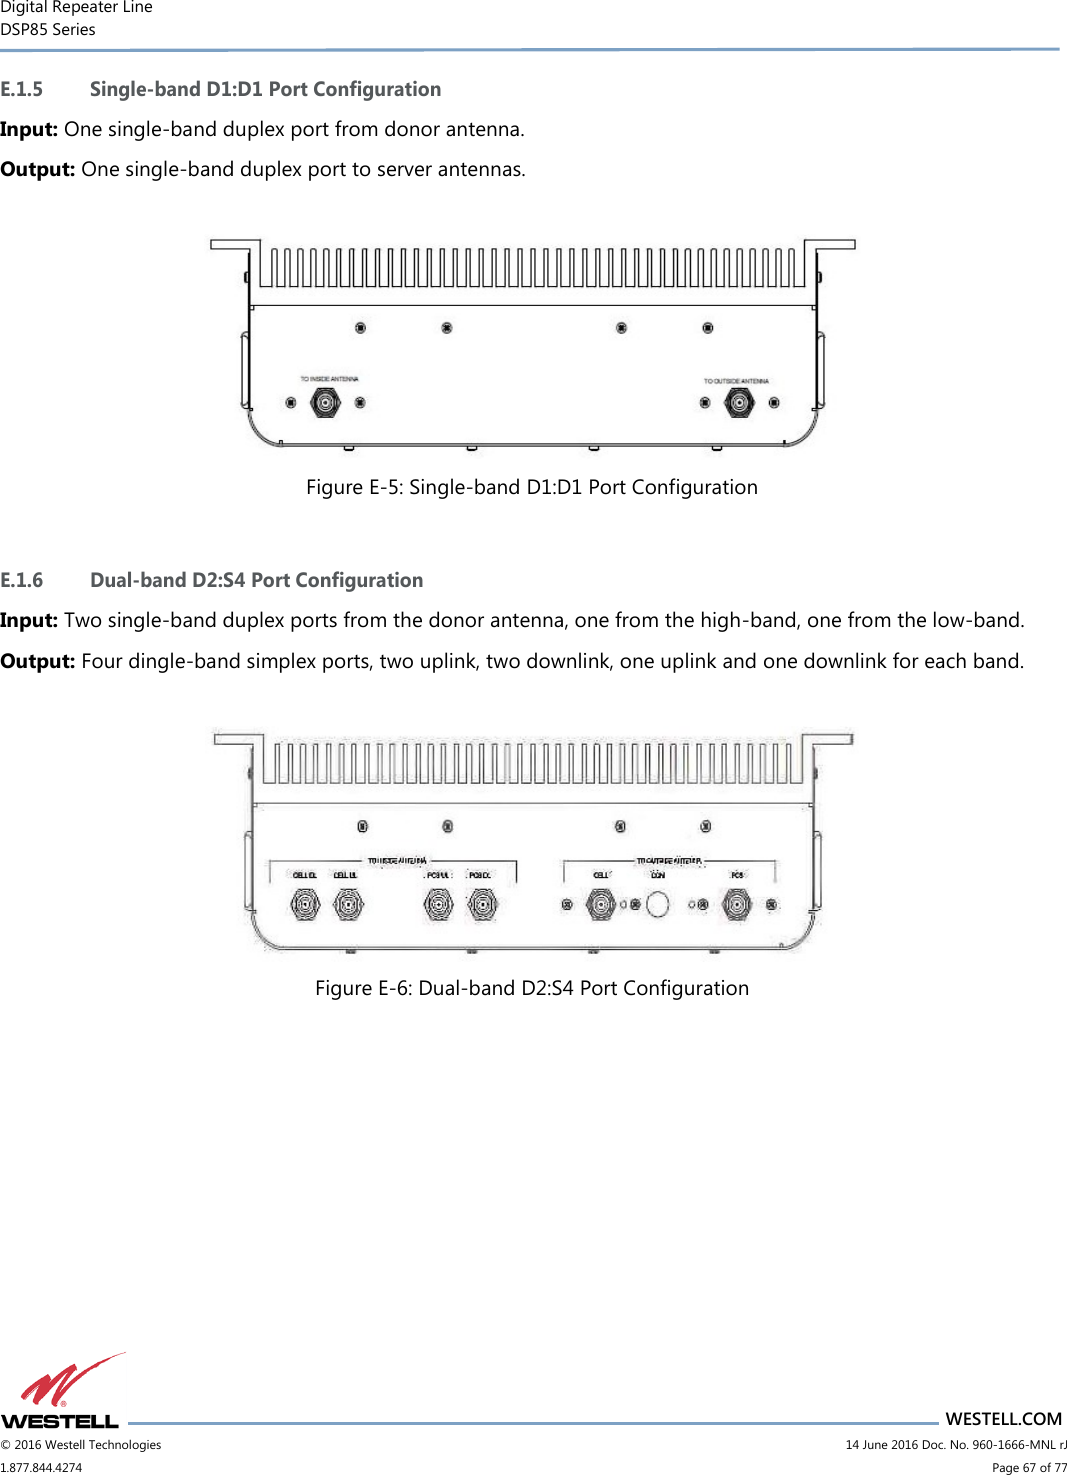 Digital Repeater Line DSP85 Series                       WESTELL.COM © 2016 Westell Technologies                         14 June 2016 Doc. No. 960-1666-MNL rJ 1.877.844.4274                             Page 67 of 77  E.1.5 Single-band D1:D1 Port Configuration Input: One single-band duplex port from donor antenna. Output: One single-band duplex port to server antennas.   Figure E-5: Single-band D1:D1 Port Configuration  E.1.6 Dual-band D2:S4 Port Configuration Input: Two single-band duplex ports from the donor antenna, one from the high-band, one from the low-band. Output: Four dingle-band simplex ports, two uplink, two downlink, one uplink and one downlink for each band.   Figure E-6: Dual-band D2:S4 Port Configuration    